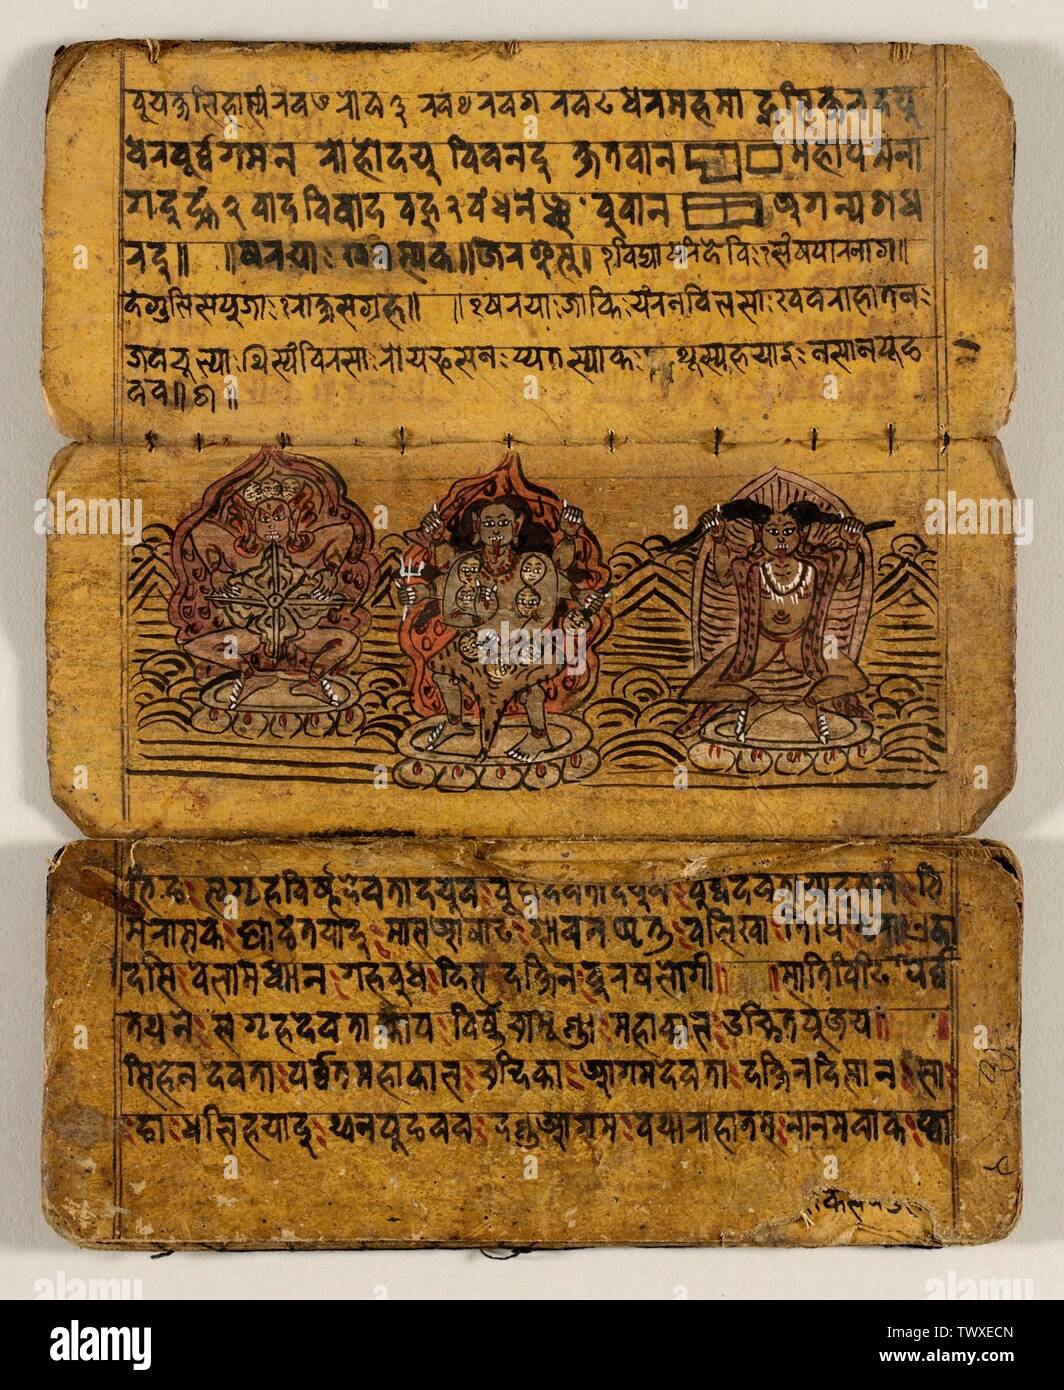 A Priest's Manual;  Nepal, 18th-19th century Books Opaque watercolor and ink on paper Pages:  3 1/2 x 8 5/16 in. (8.9 x 21.1 cm) each Gift of Mr. and Mrs. Frank Neustatter (M.90.133.1) South and Southeast Asian Art; 18th-19th century; Stock Photo